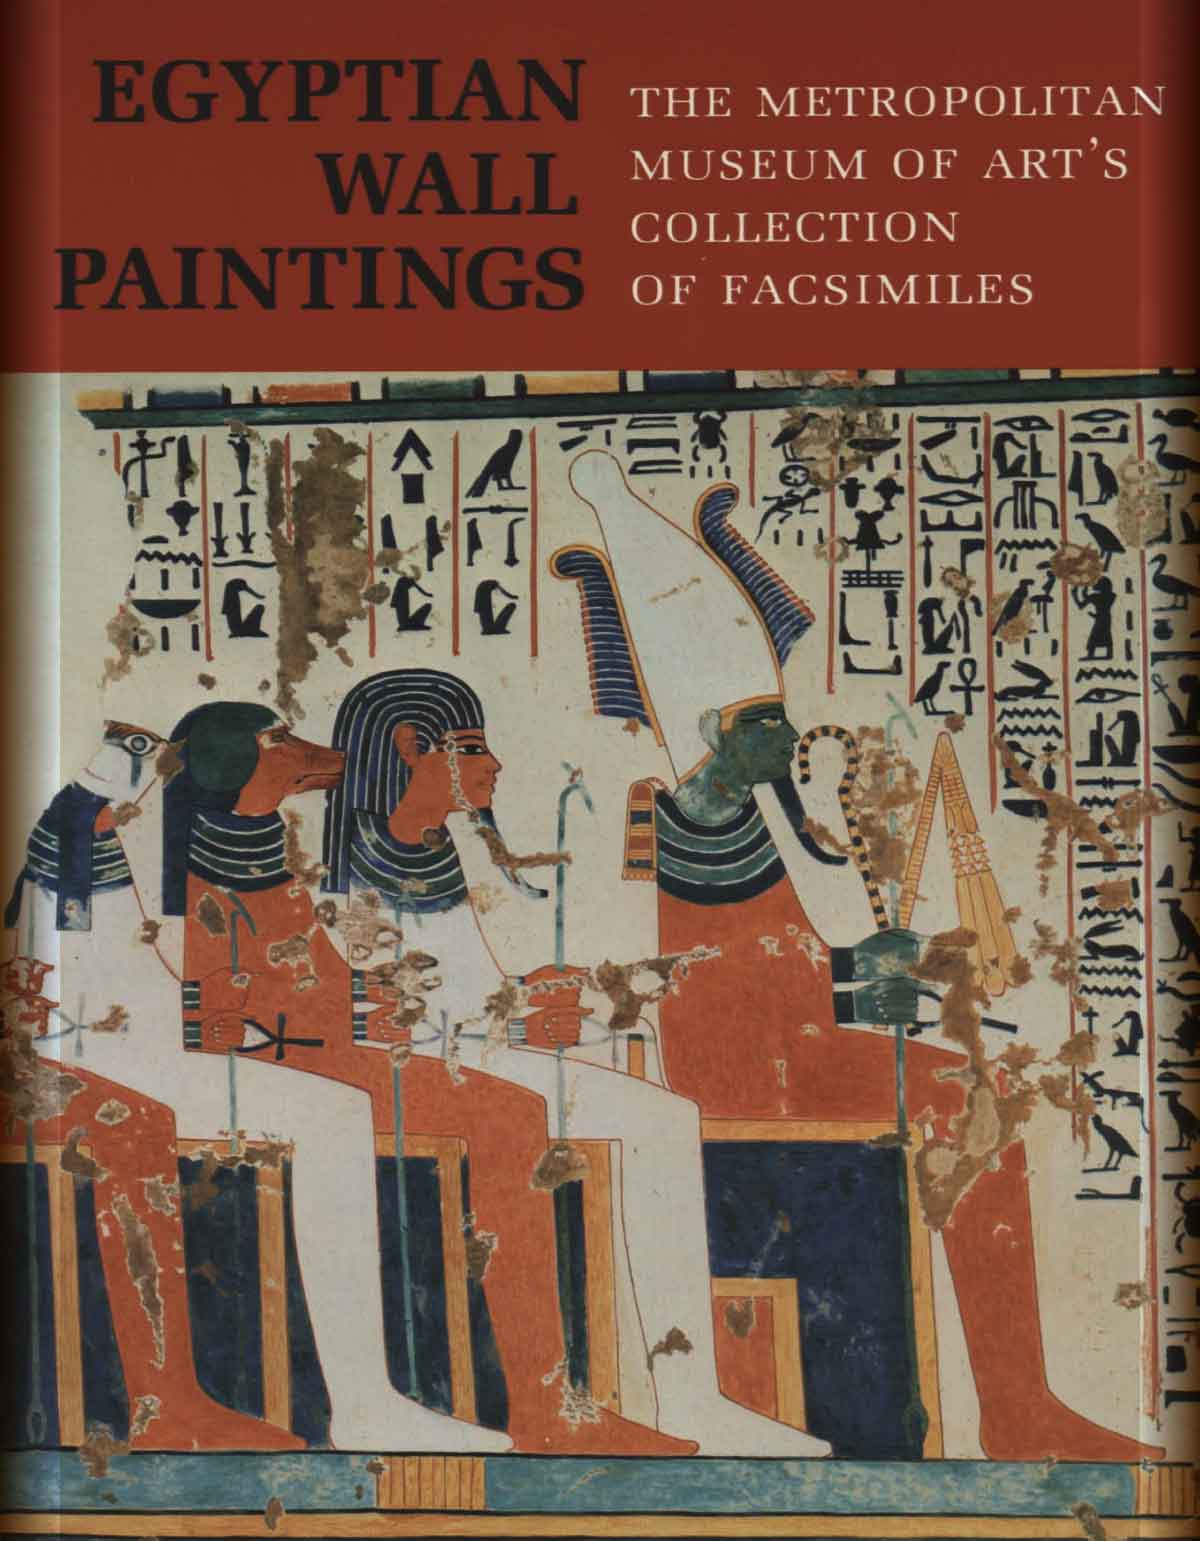 Egyptian_Wall_Paintings_The_Metropolitan_Museum_of_Arts_Collection_of_Facsimiles-cover